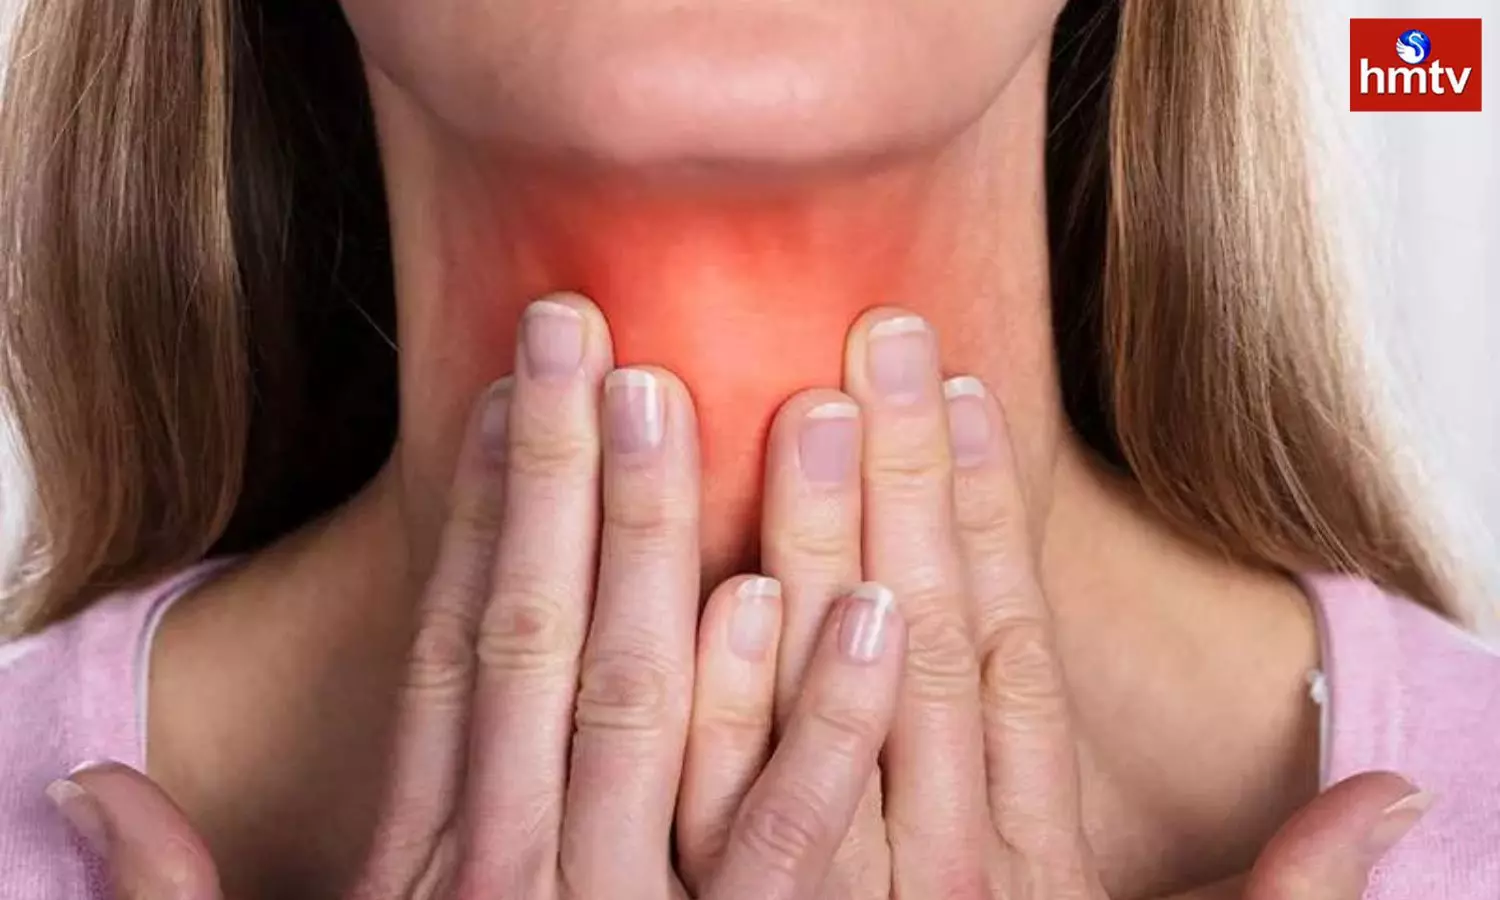 Are you having Trouble with Thyroid if you make these Changes in Diet the Problem will go Away